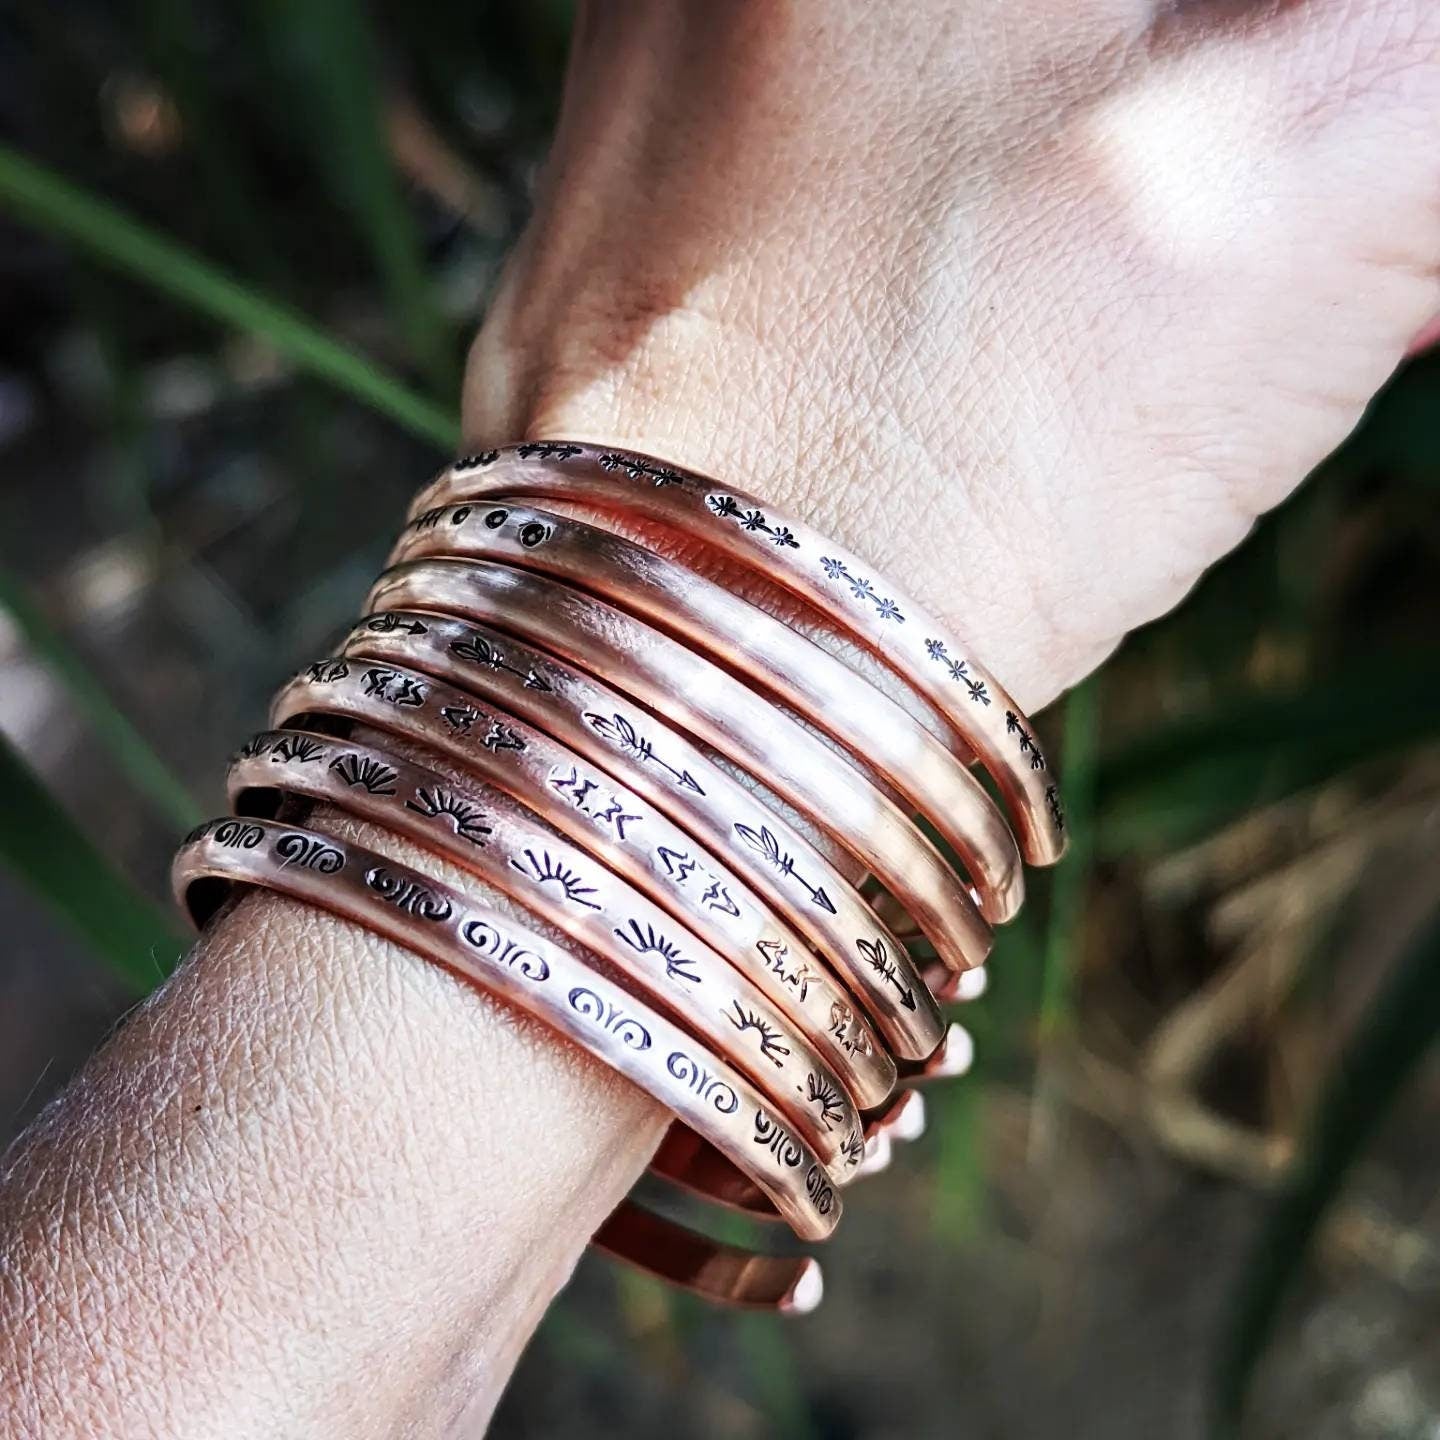 Copper cuff bracelets with stars and Thunderbird arrows